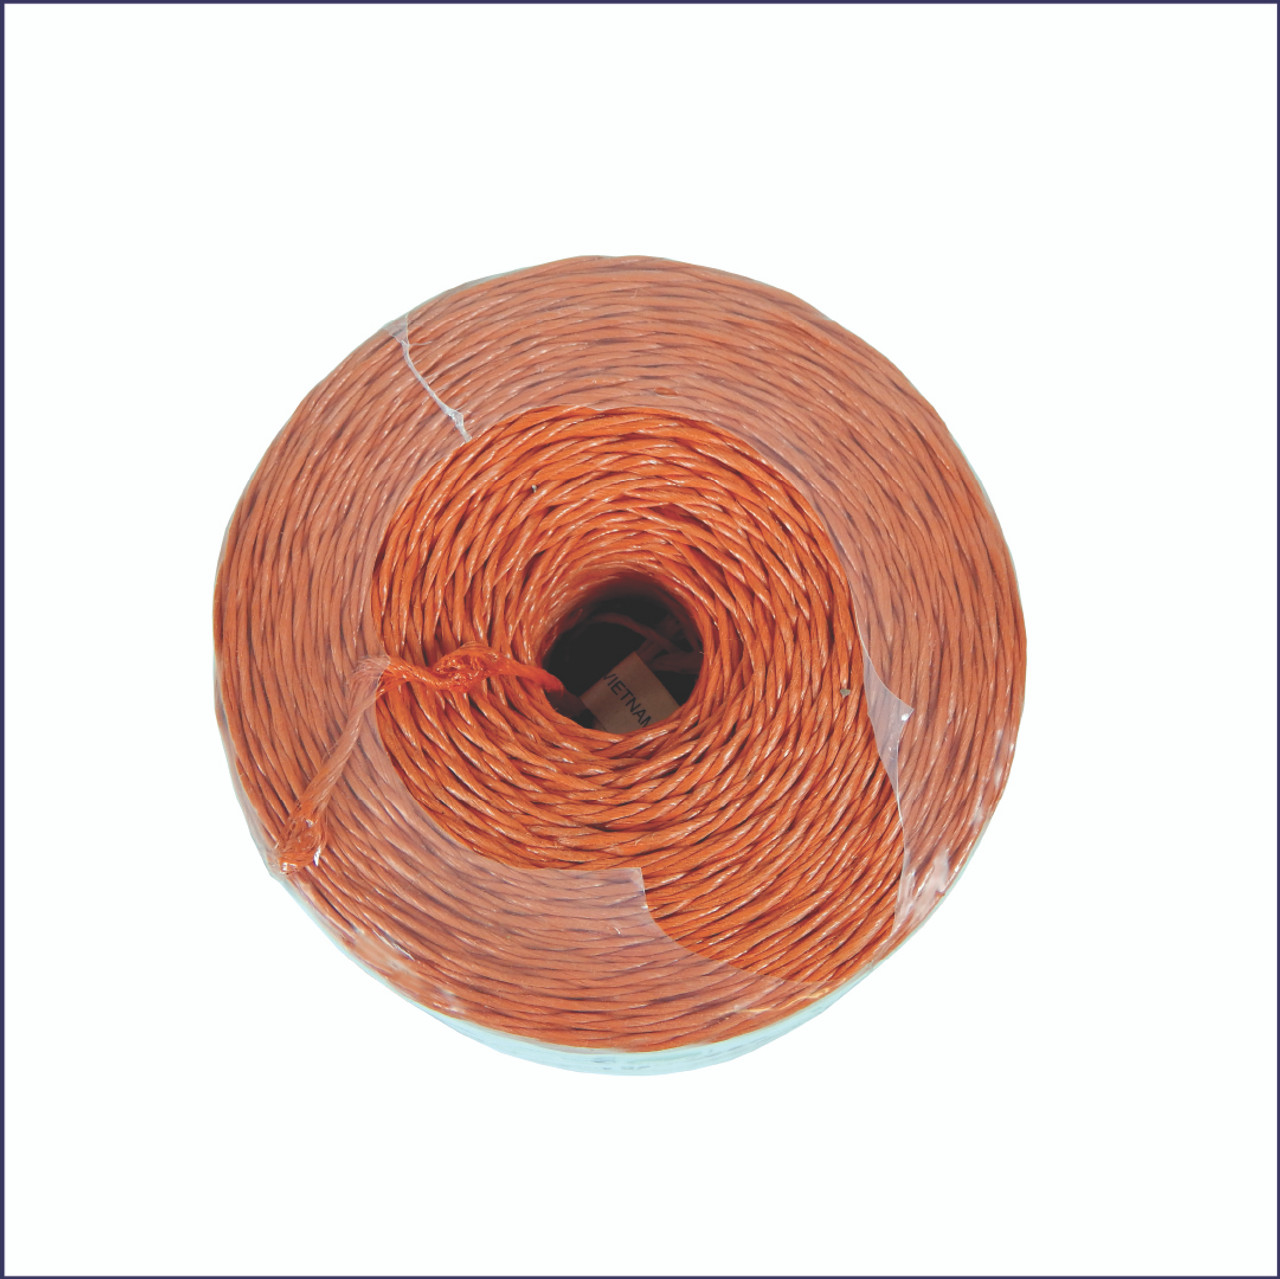 Hemp Baling Twine for Round Balers, Tractor Tools Direct